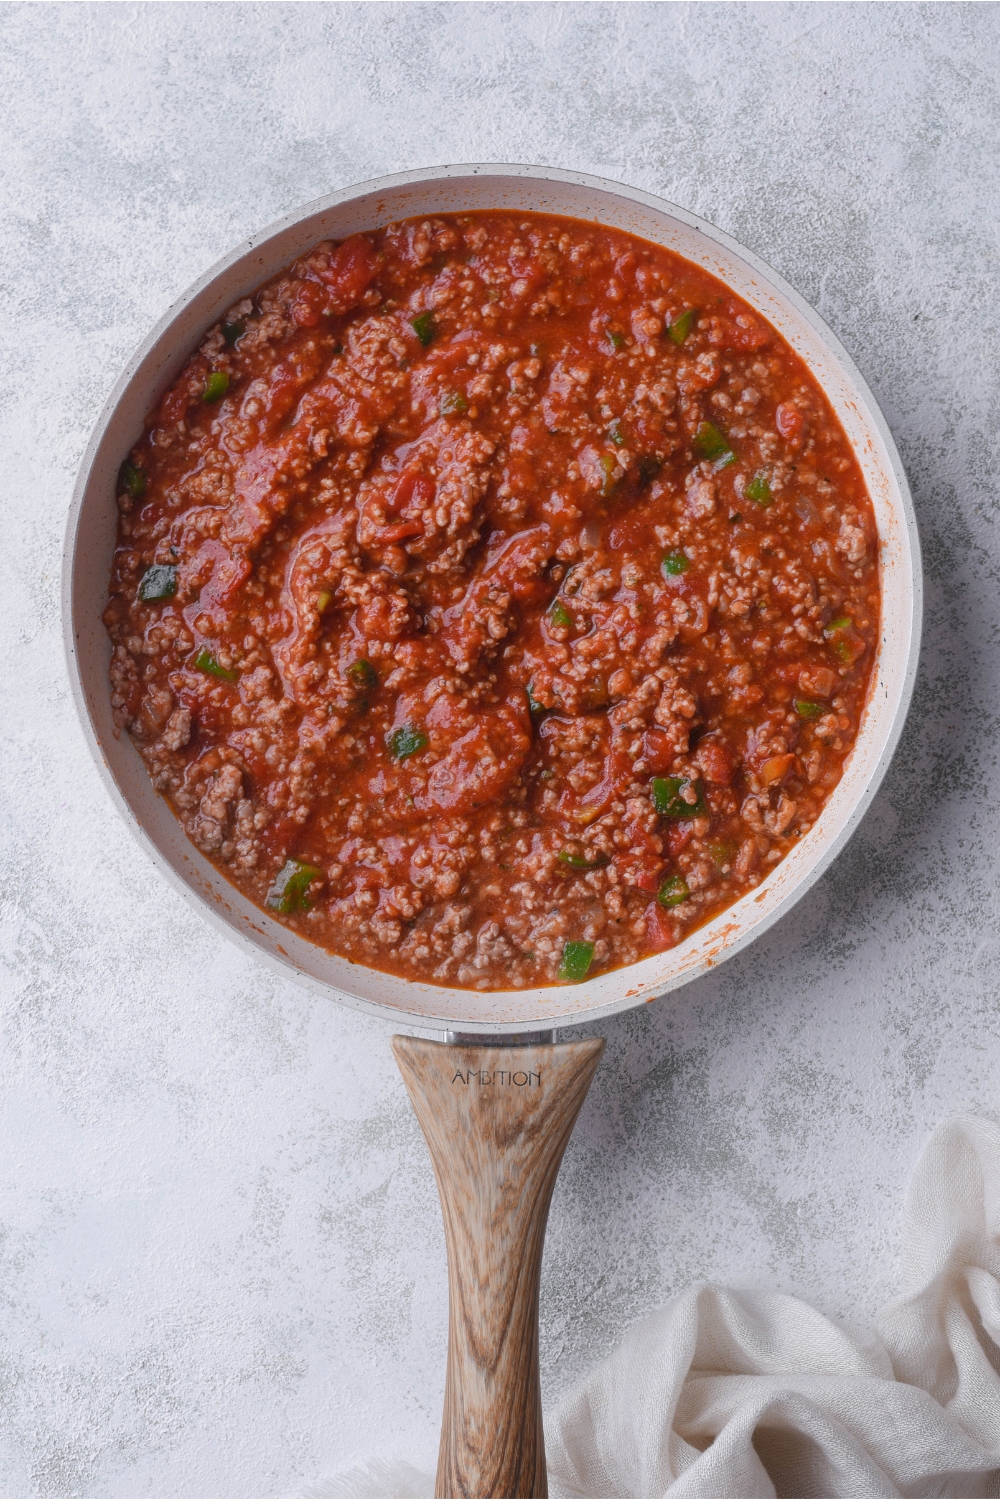 A grey skillet with a wood handle filled with coked brown beef and diced peppers in a thick tomato sauce.